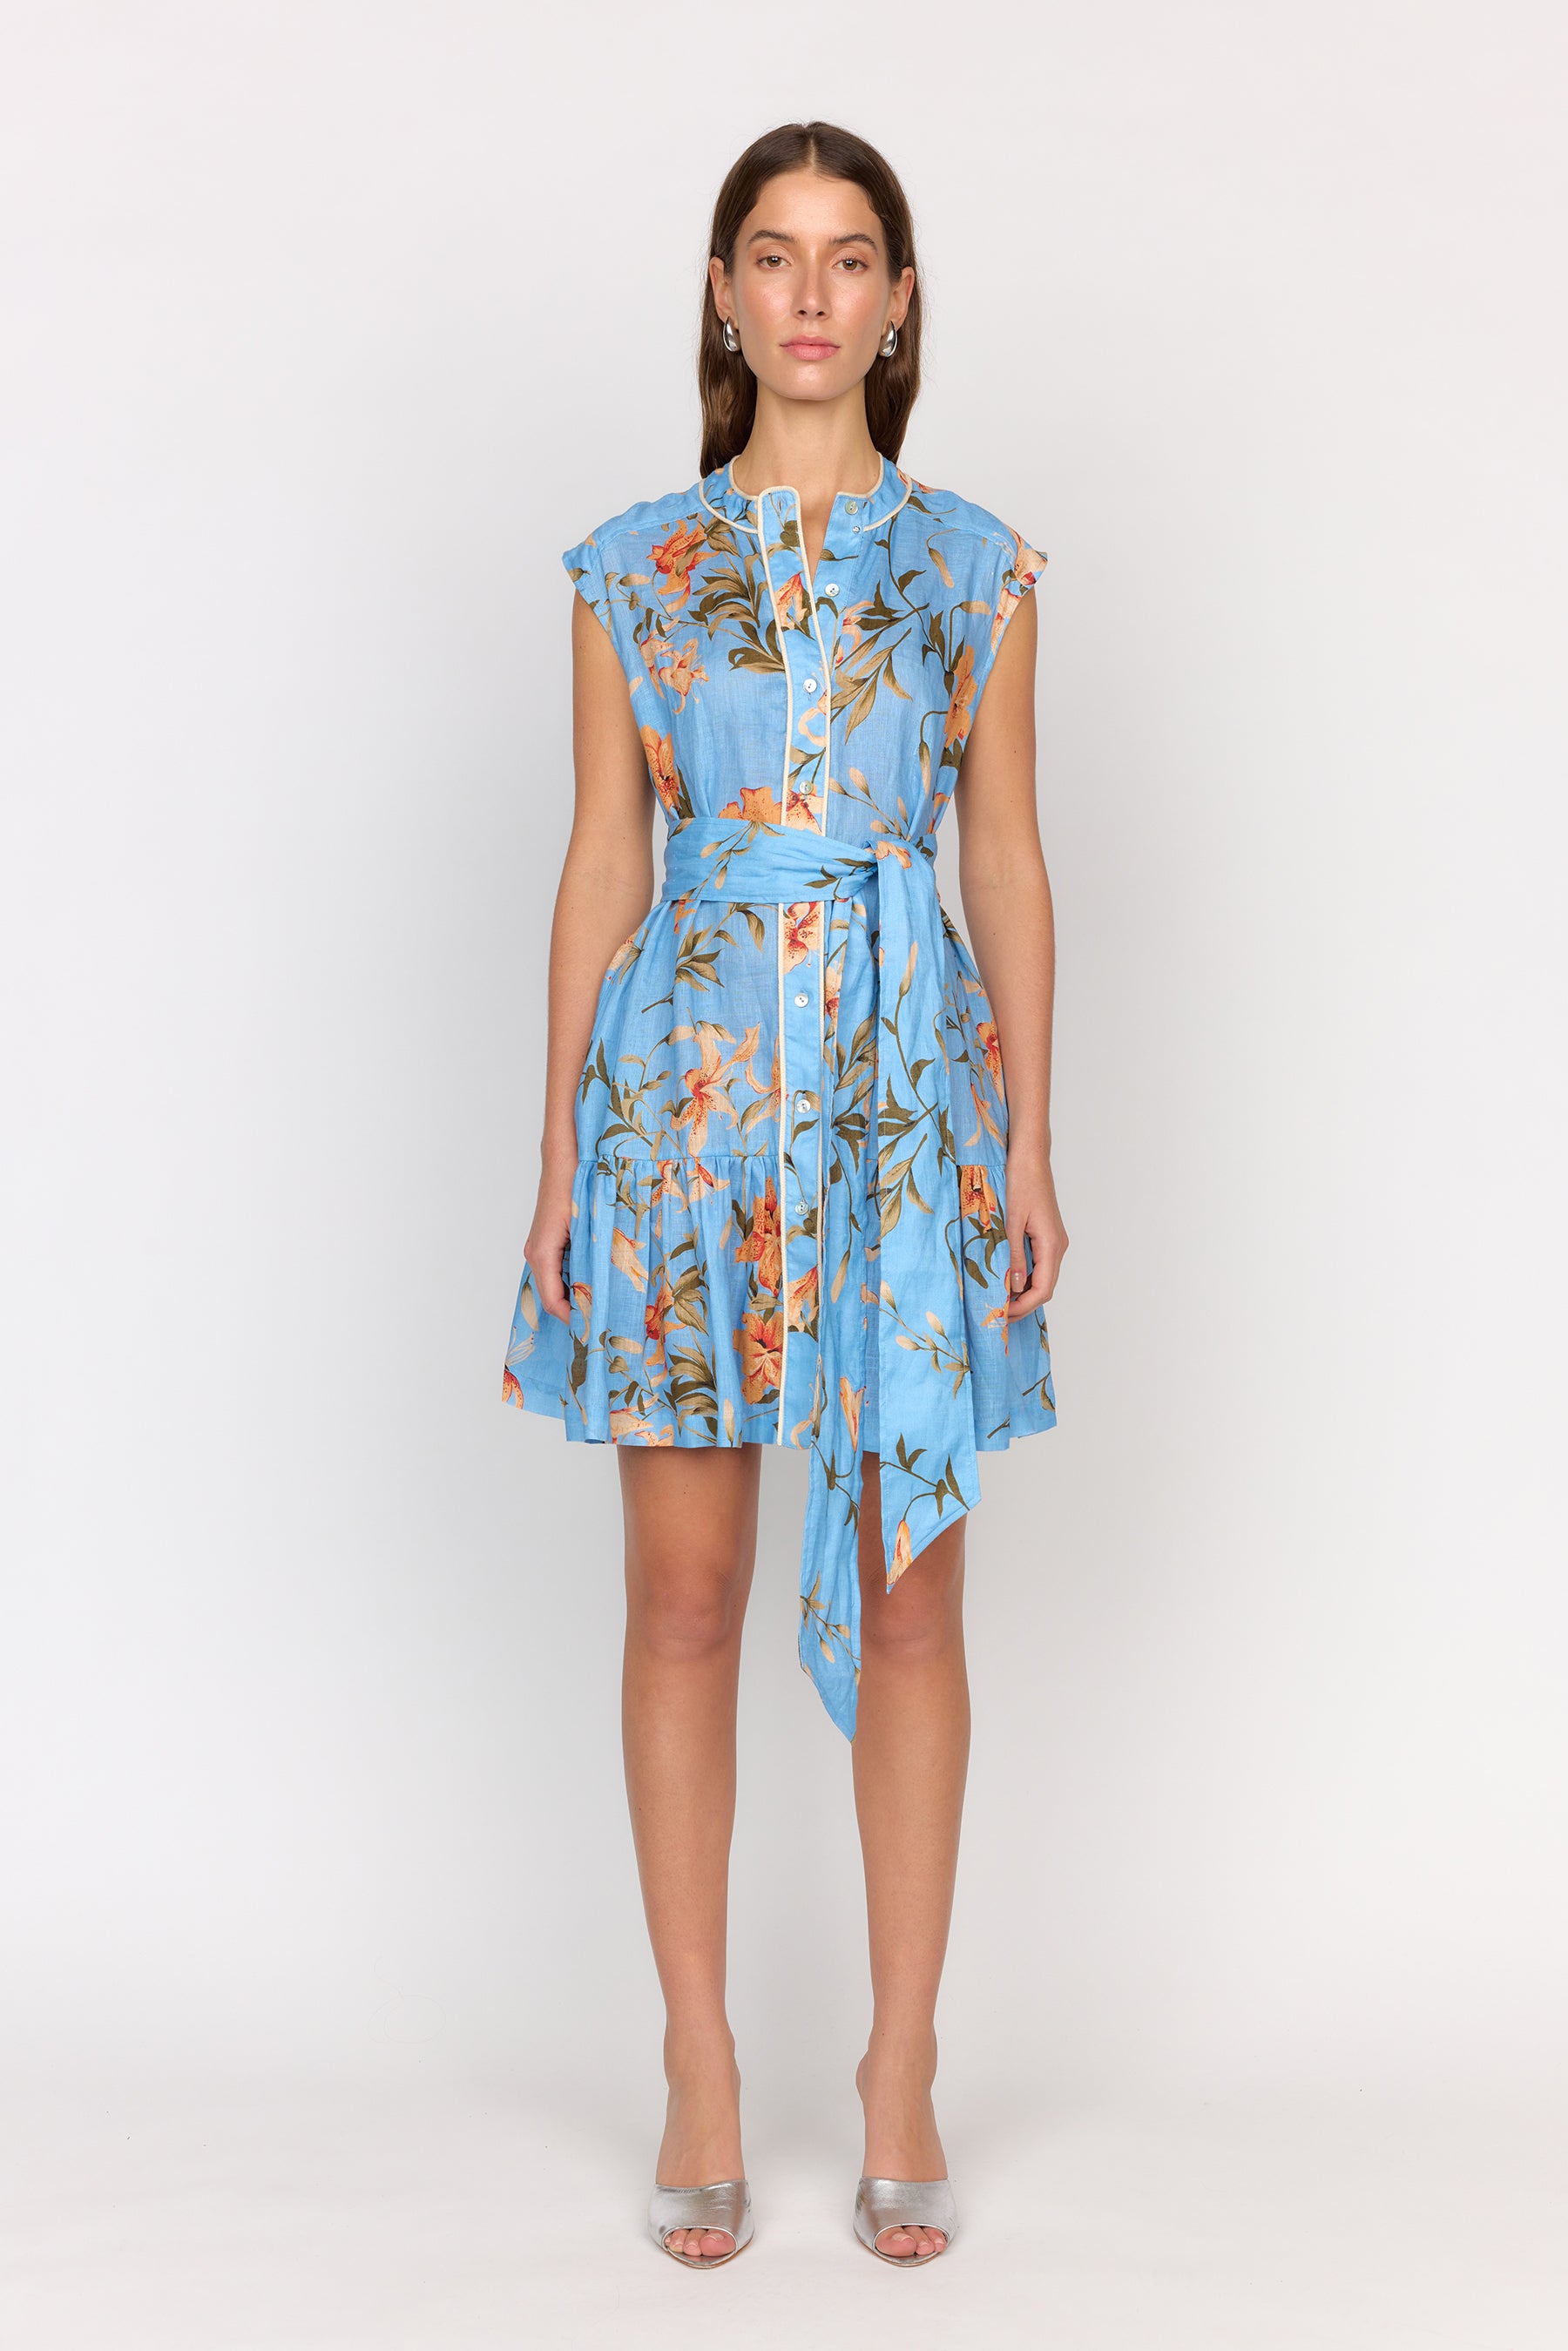 Lucie Dress - Tiger Lily